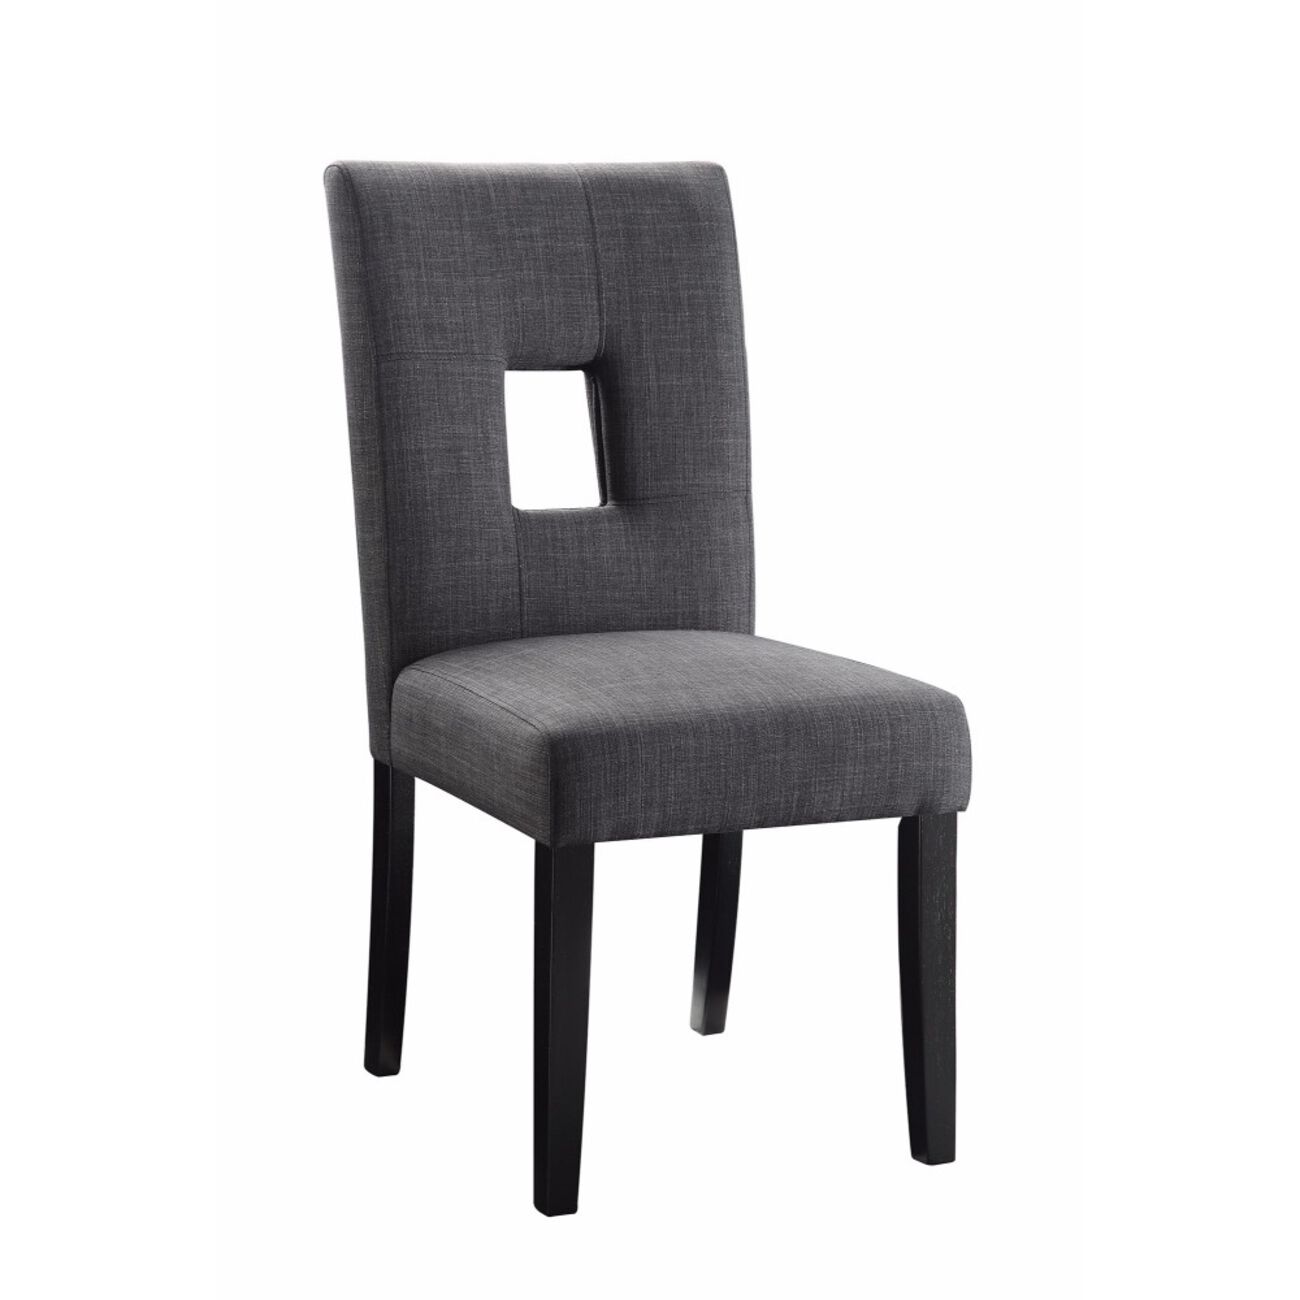 Wooden Dining Side Chair, Gray & Black, Set of 2